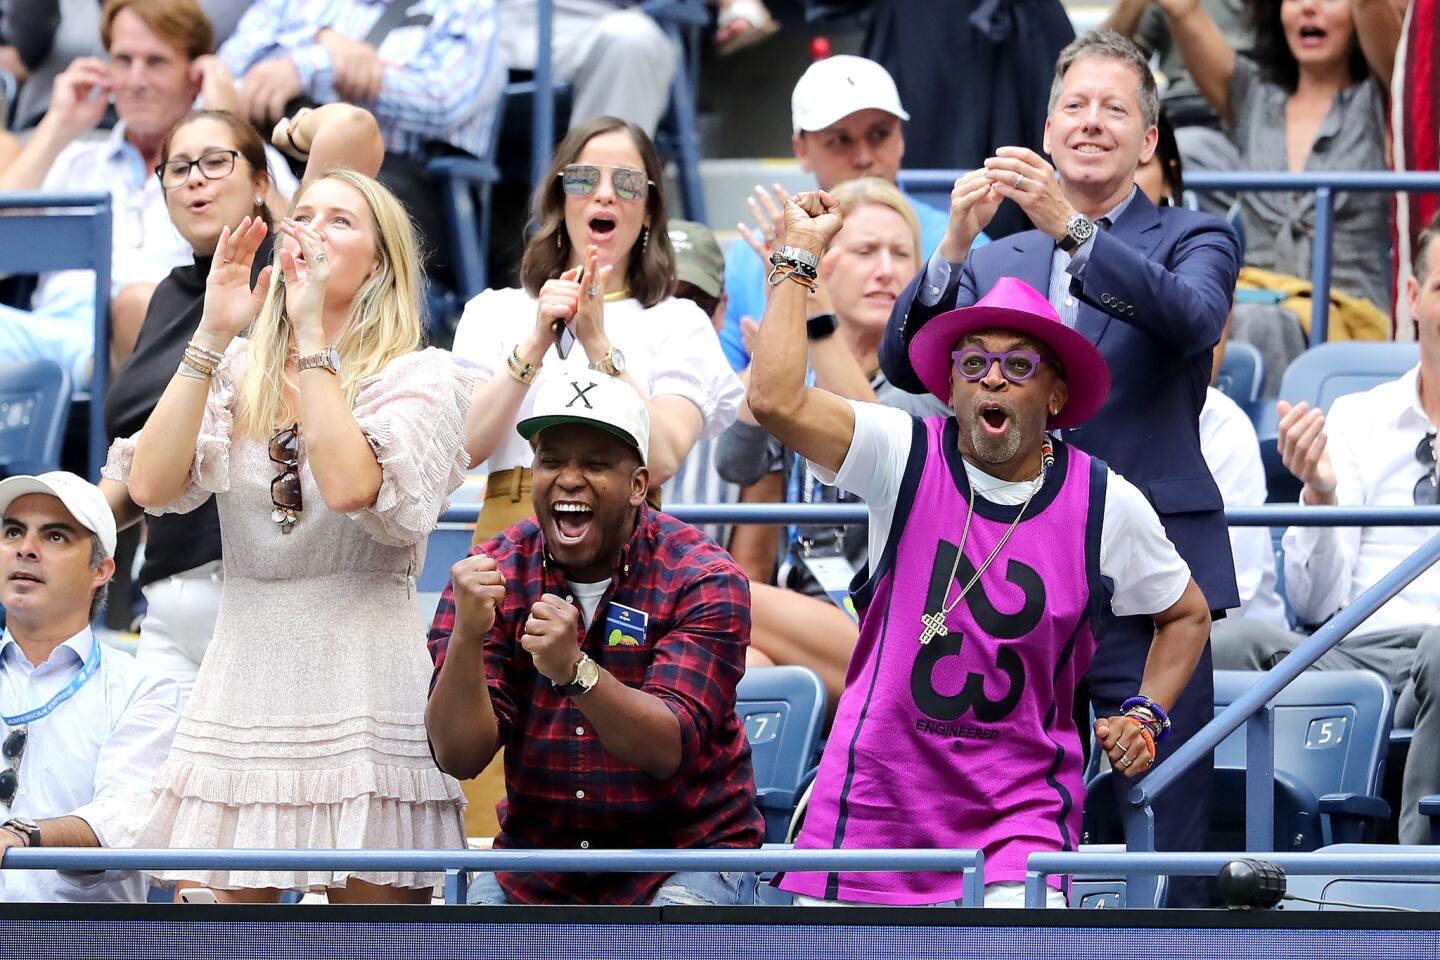 Spike Lee, director and producer, celebrates a point during the Women's Singles final match between Serena Williams of the United States and Bianca Andreescu of Canada on day thirteen of the 2019 U.S. Open at the USTA Billie Jean King National Tennis Center on Sept. 7, 2019, in Queens.